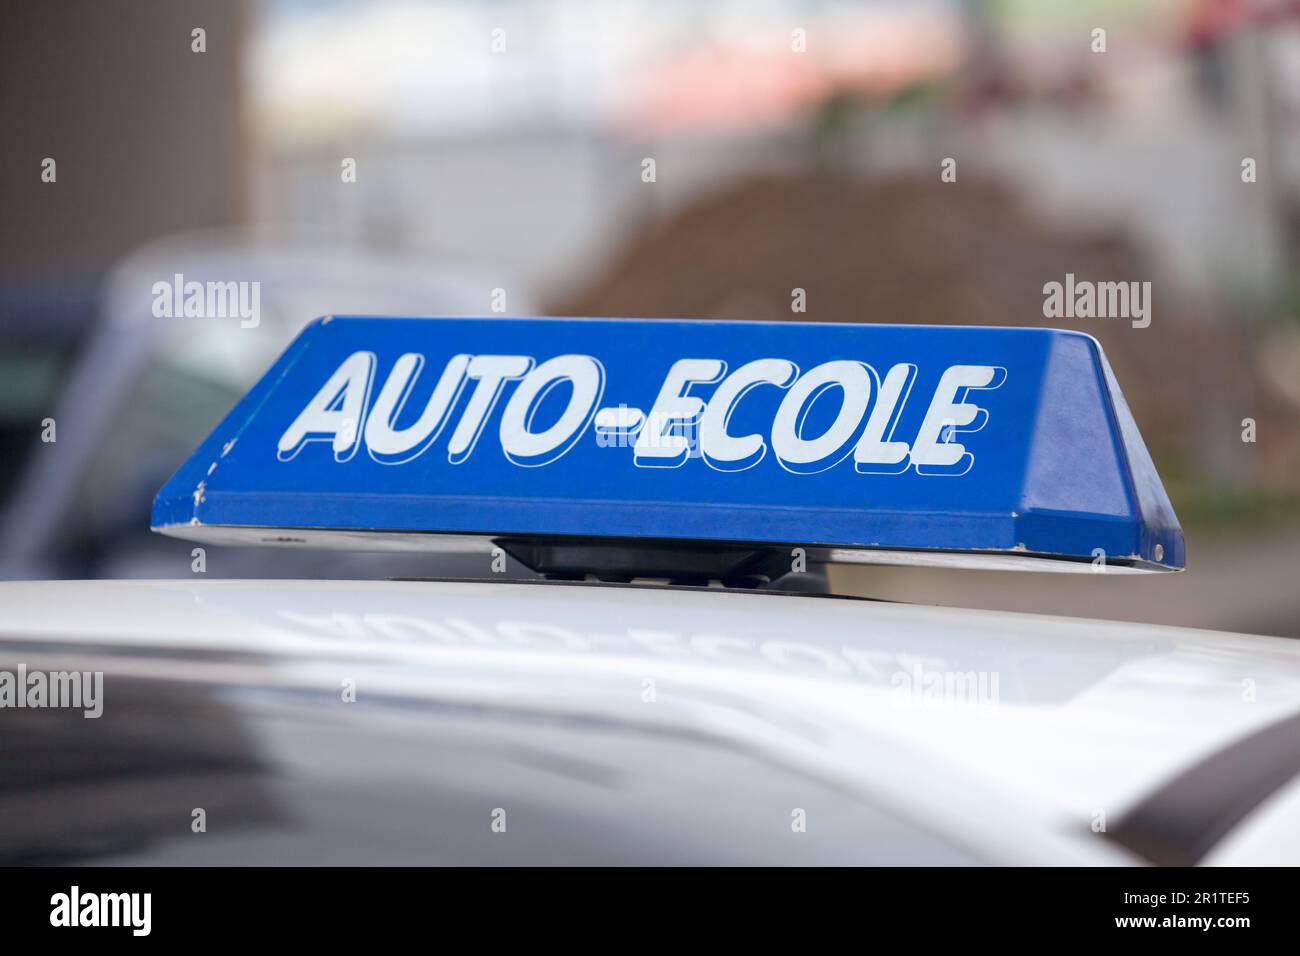 Blue car roof sign with written in it in French 'Auto-Ecole', meaning in English 'Driving school'. Stock Photo